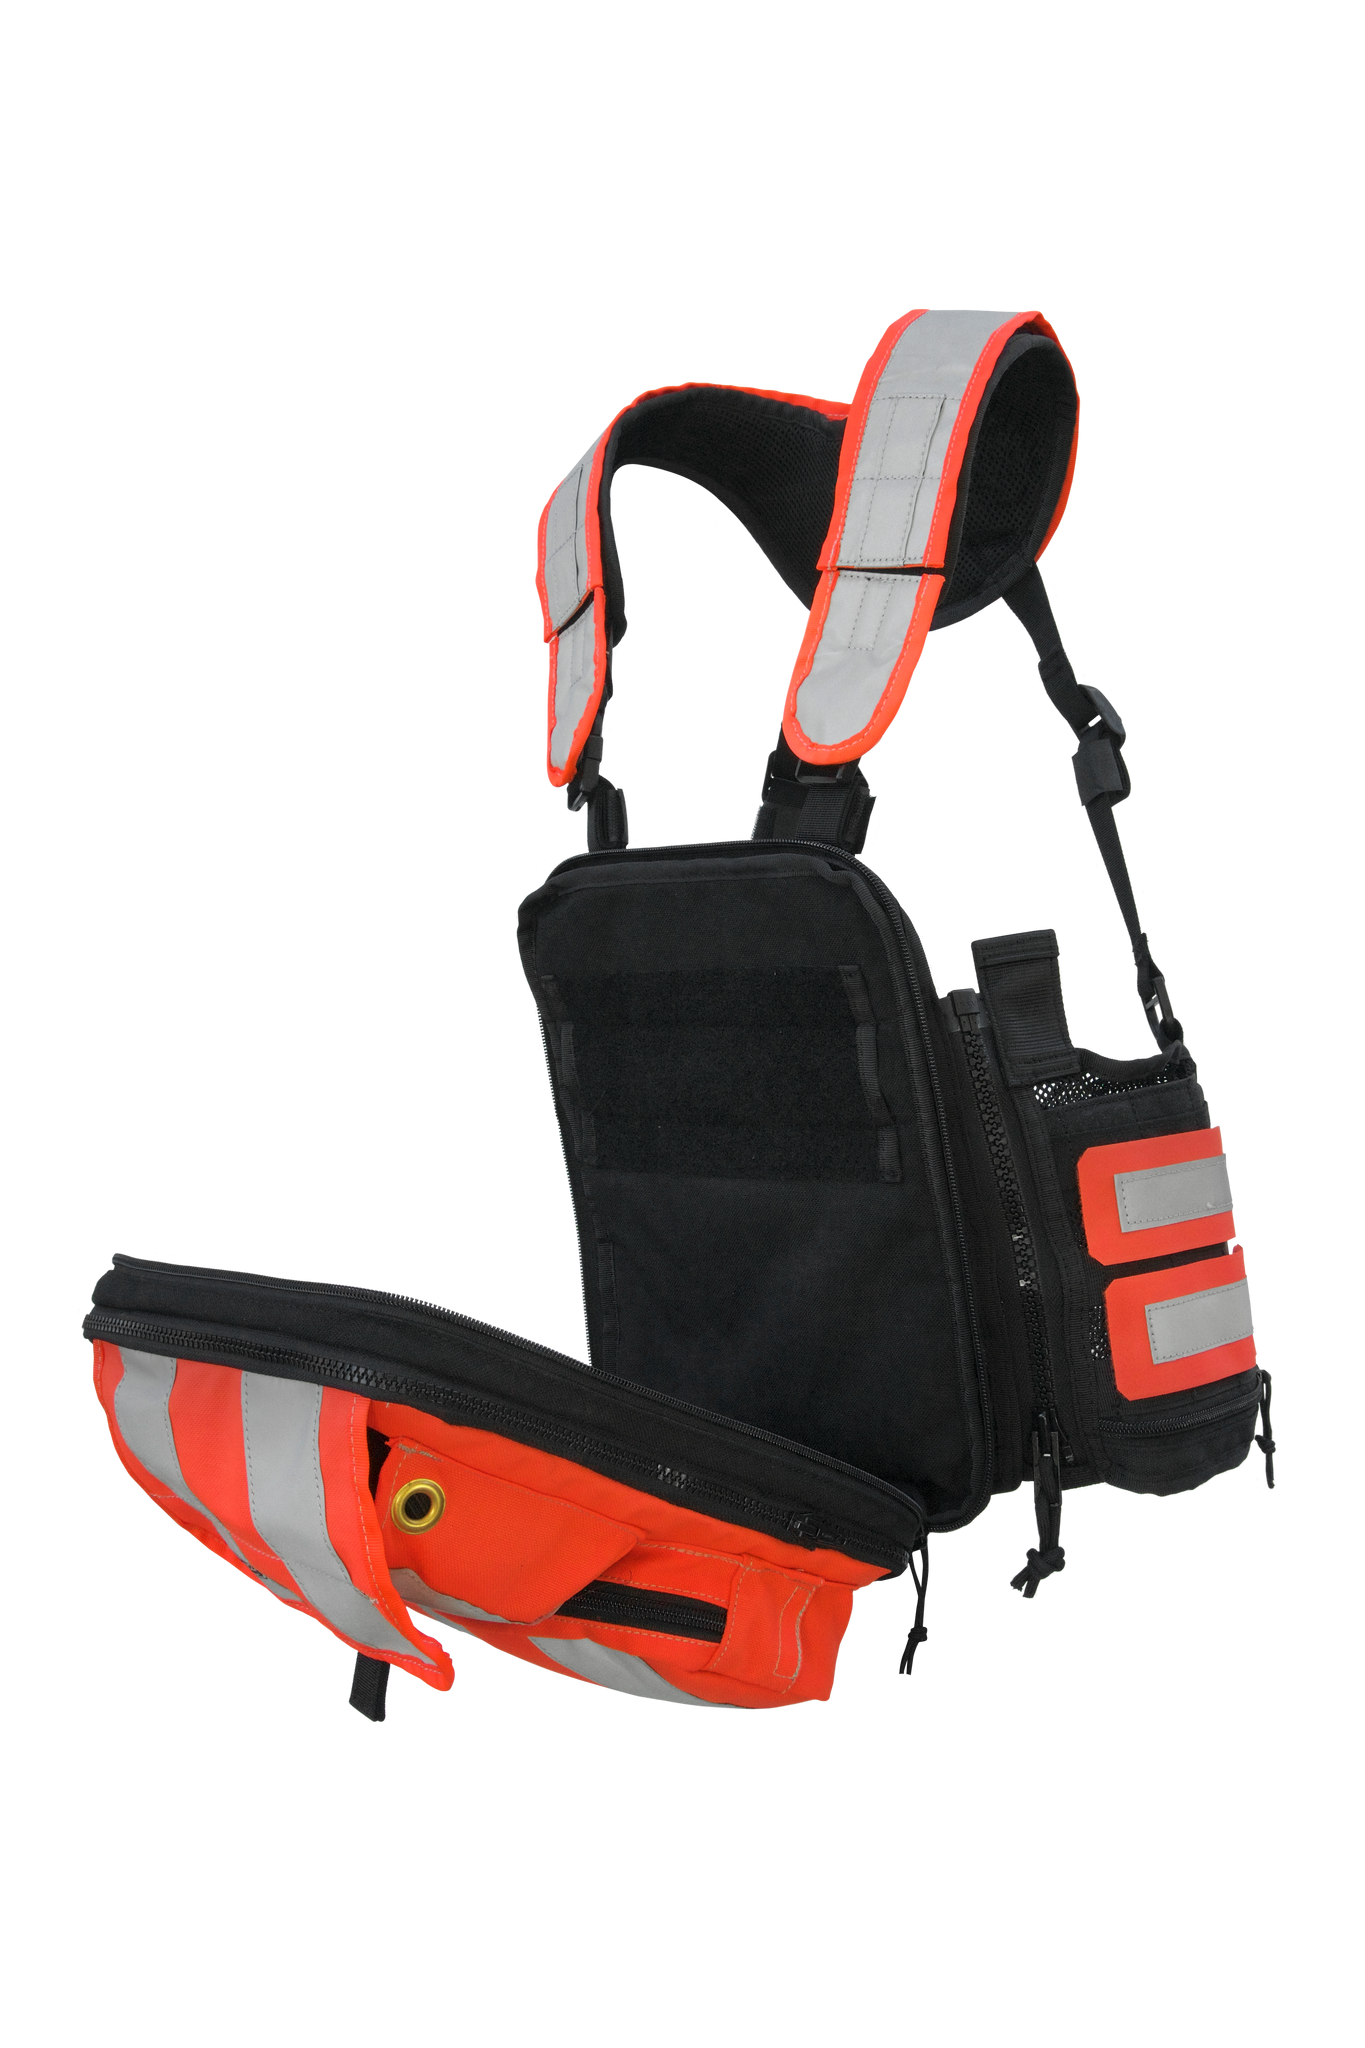 High Vis-Ruxton Package – Now 2 Sizes to fit almost any tablet computer!